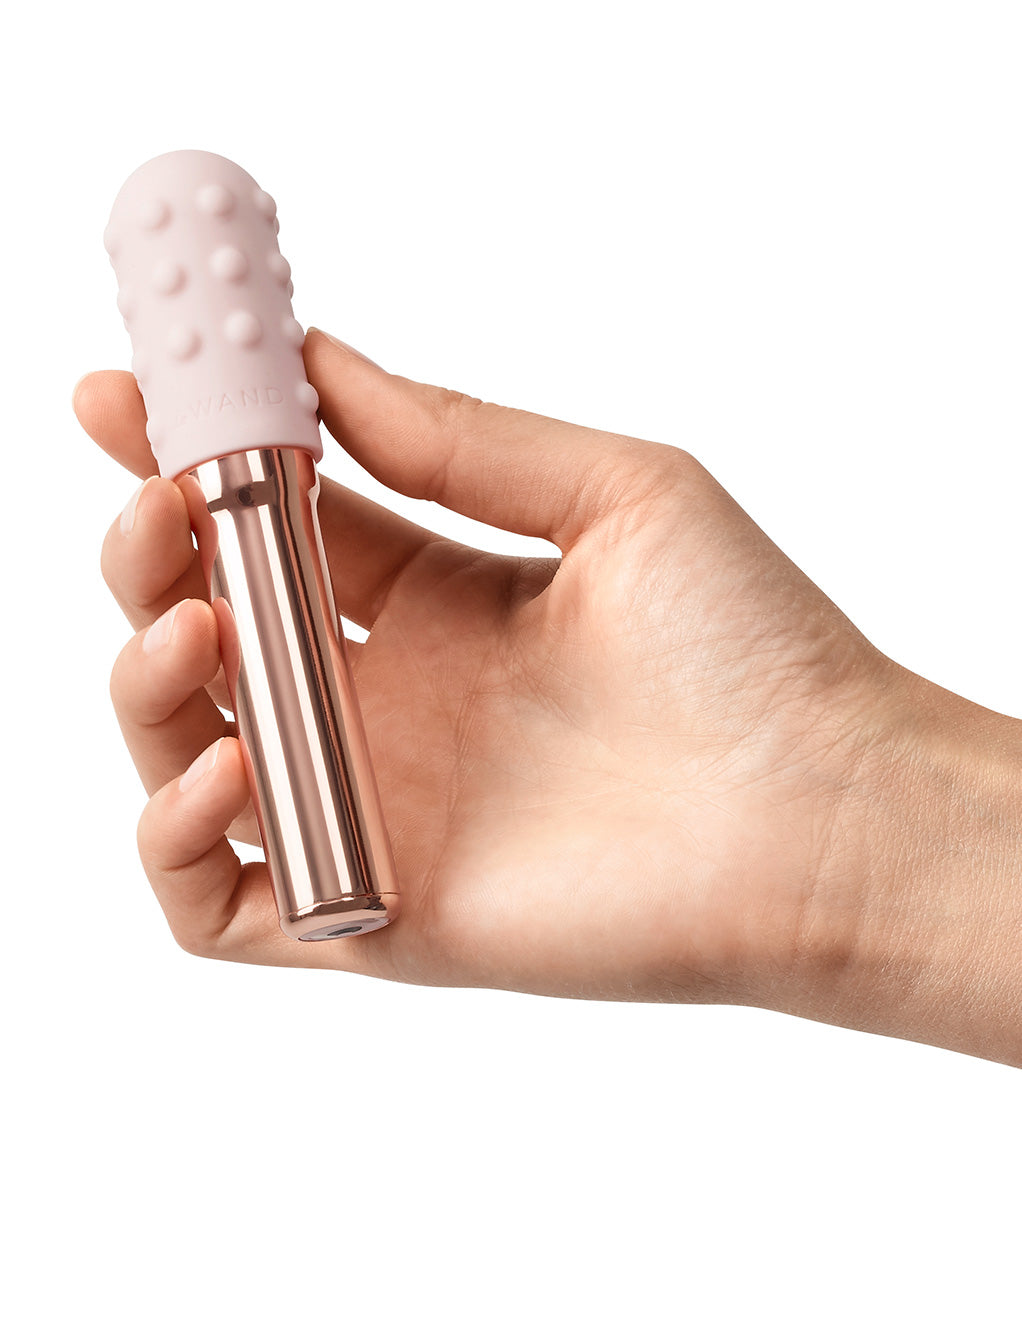 Le Wand Grand Bullet Rechargeable Clitoral Vibrator- Rose Gold- In hand